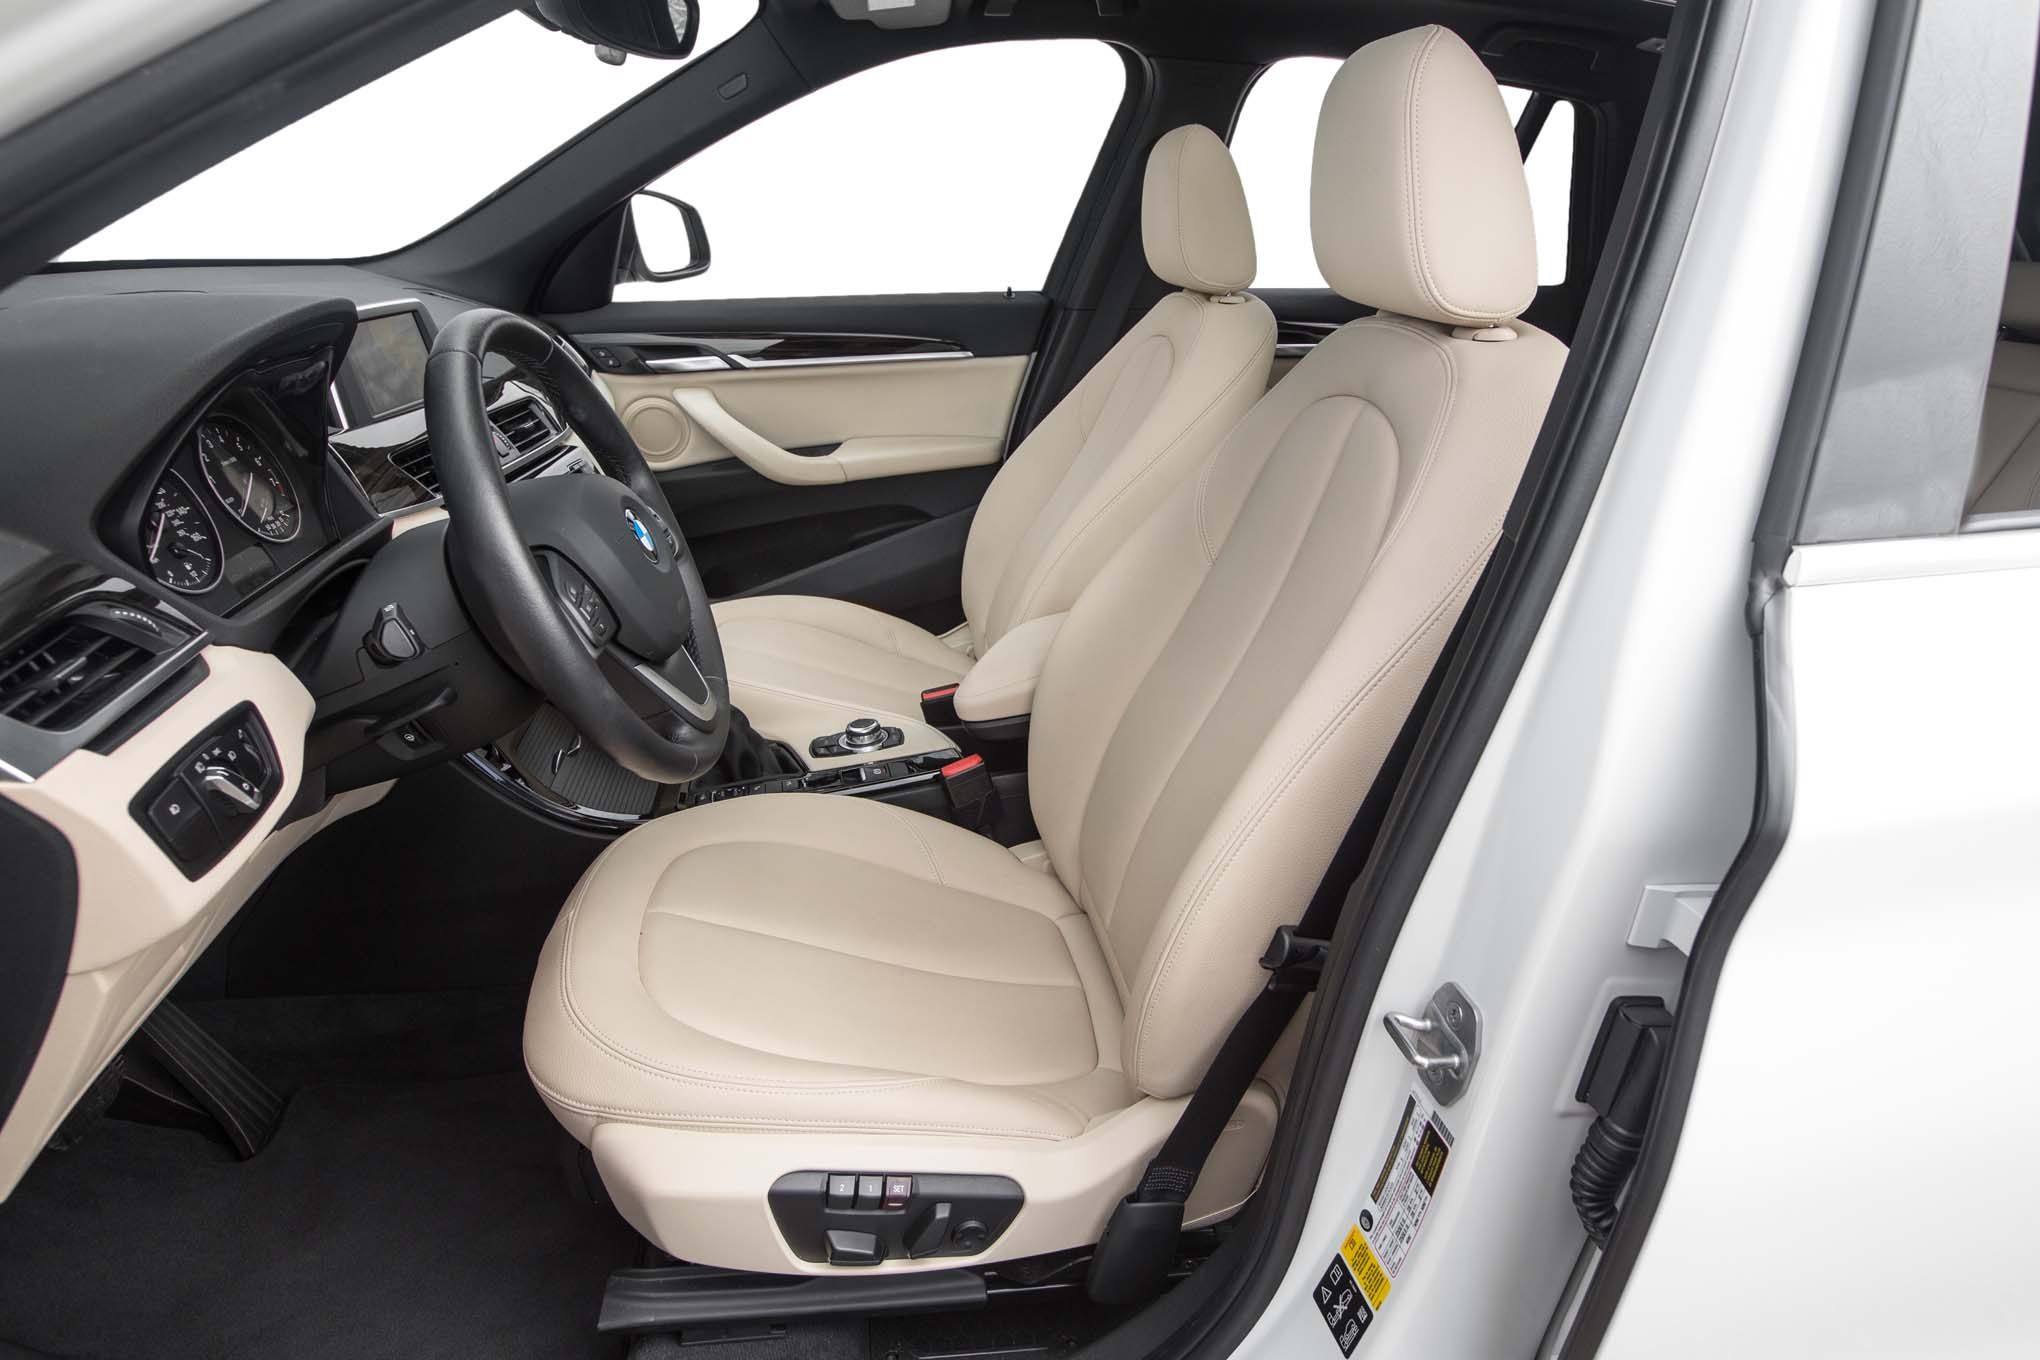 2017 Bmw X1 Xdrive28i Interior Seats Front (View 13 of 23)